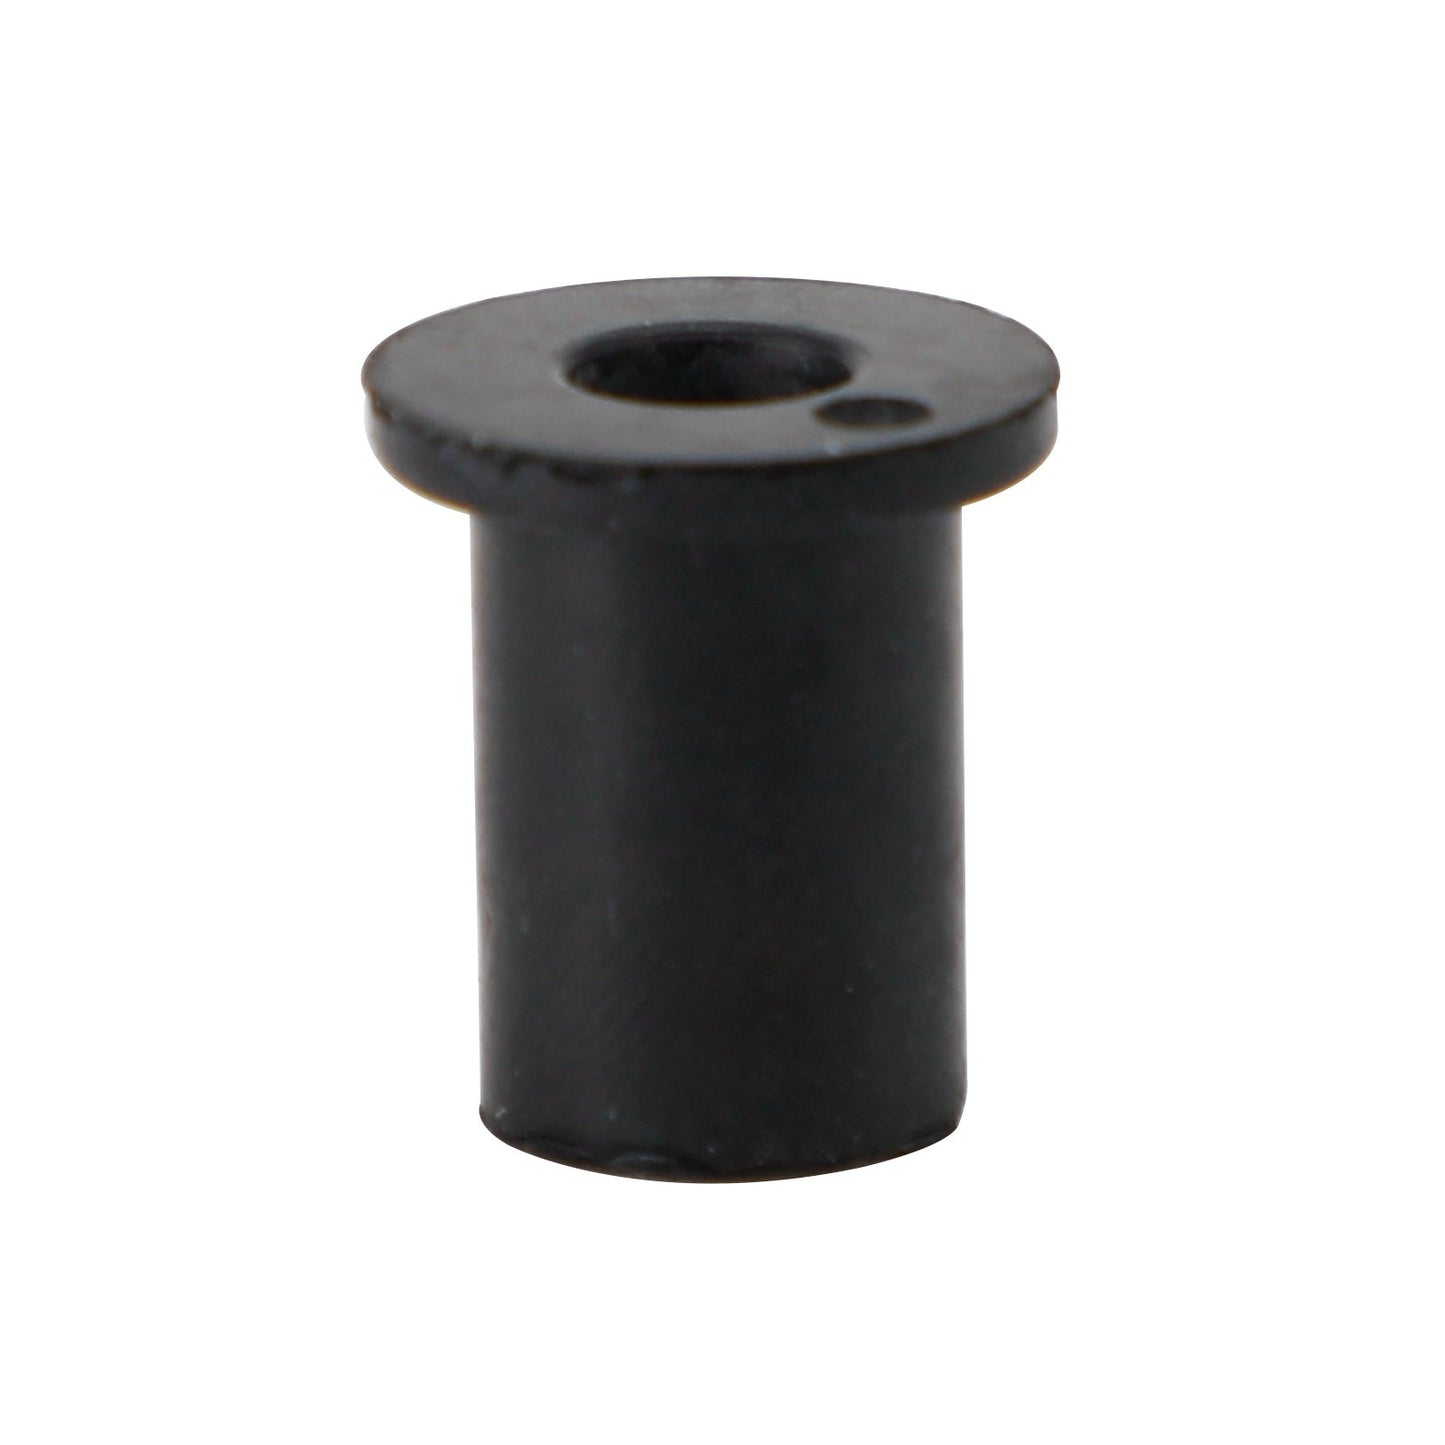 M4 Rubber Well Nuts Wellnuts for Fairing & Screen Fixing Pack of 50 - 8mm Hole